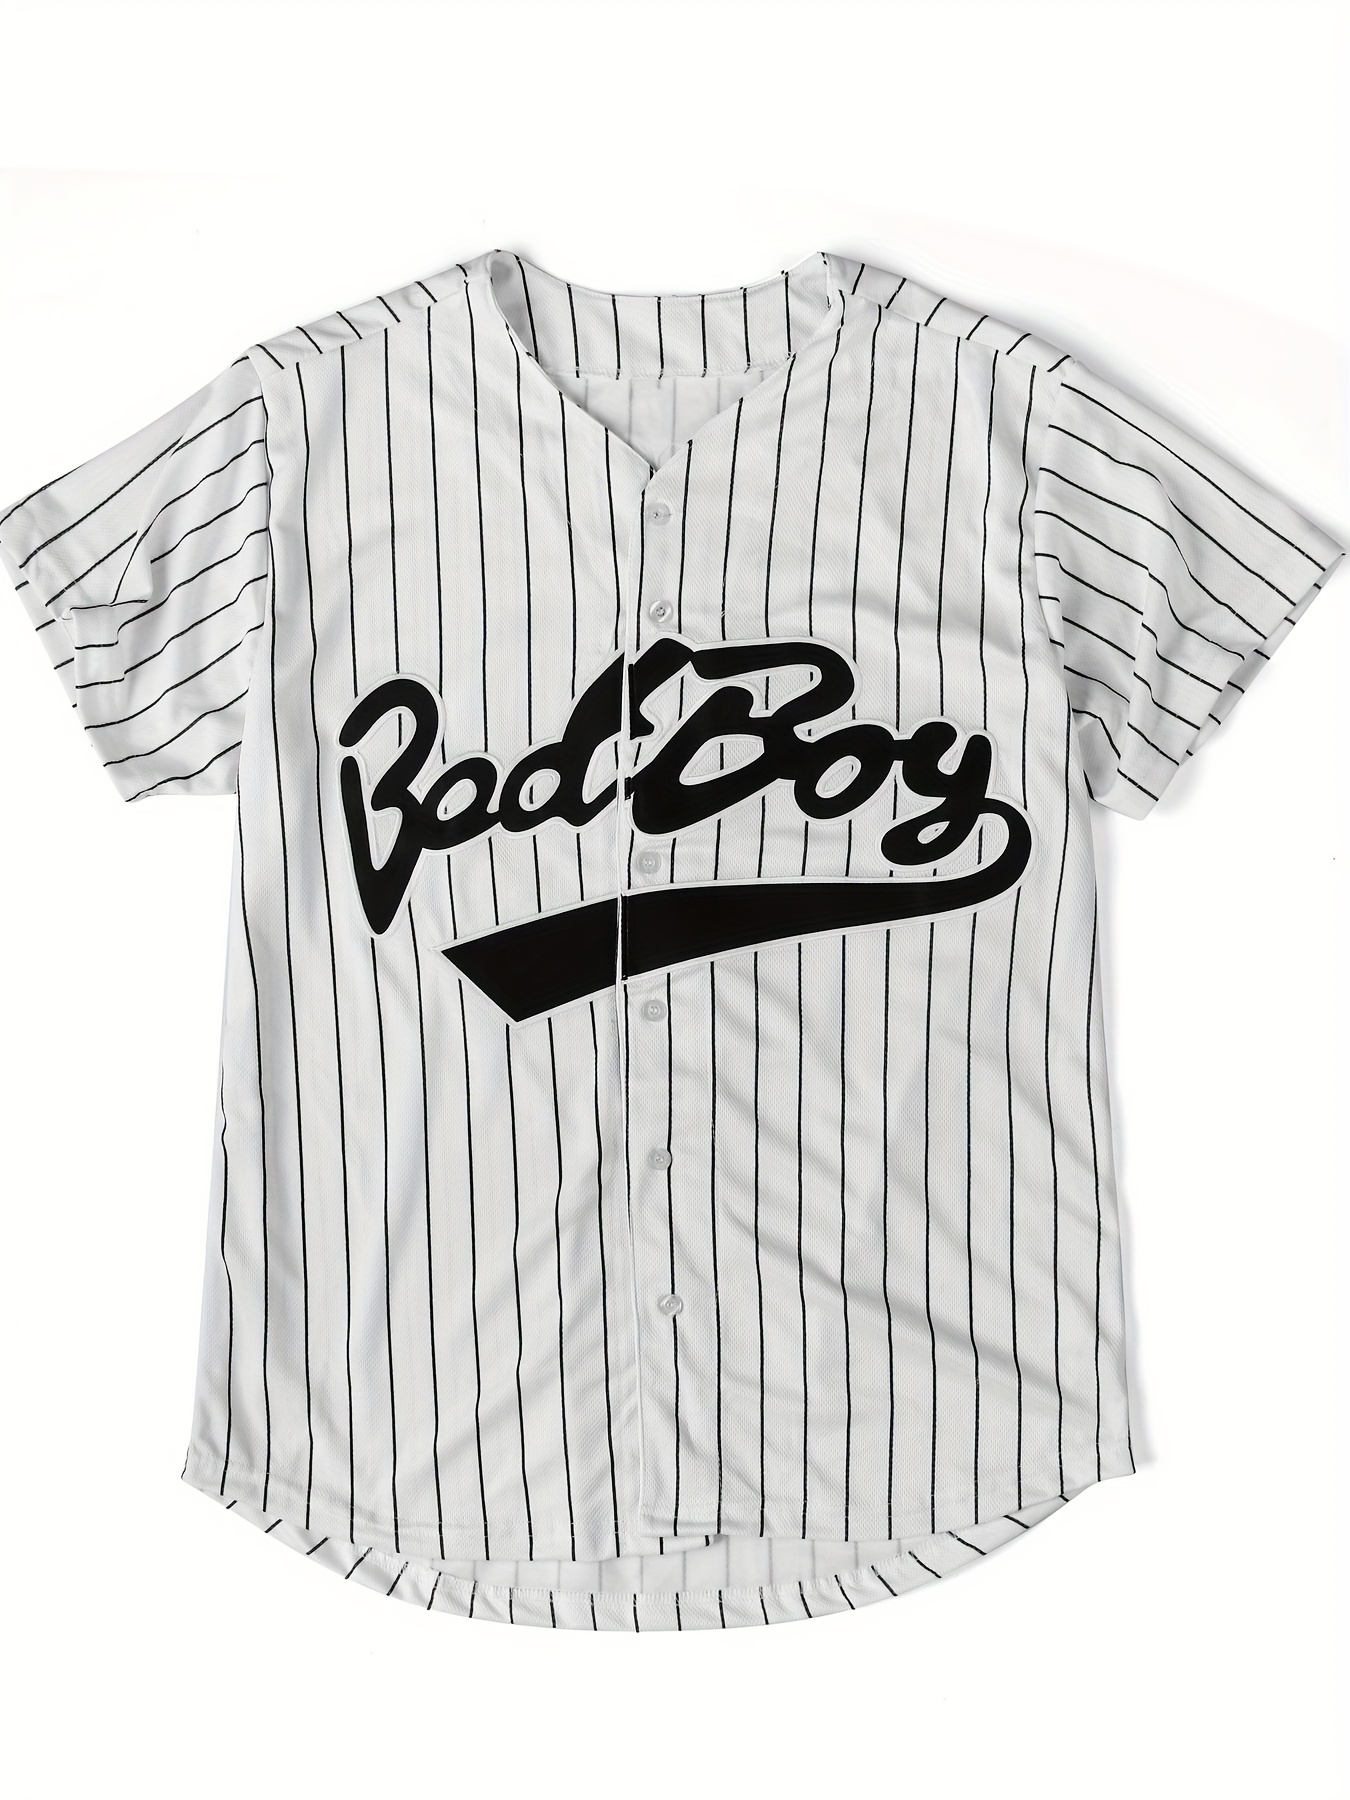  Bad Boy Jersey,#10 Biggie Baseball Jersey S-XXXL,90S Hip Hop  Clothing for Party, Stitched Letters and Numbers : Clothing, Shoes & Jewelry